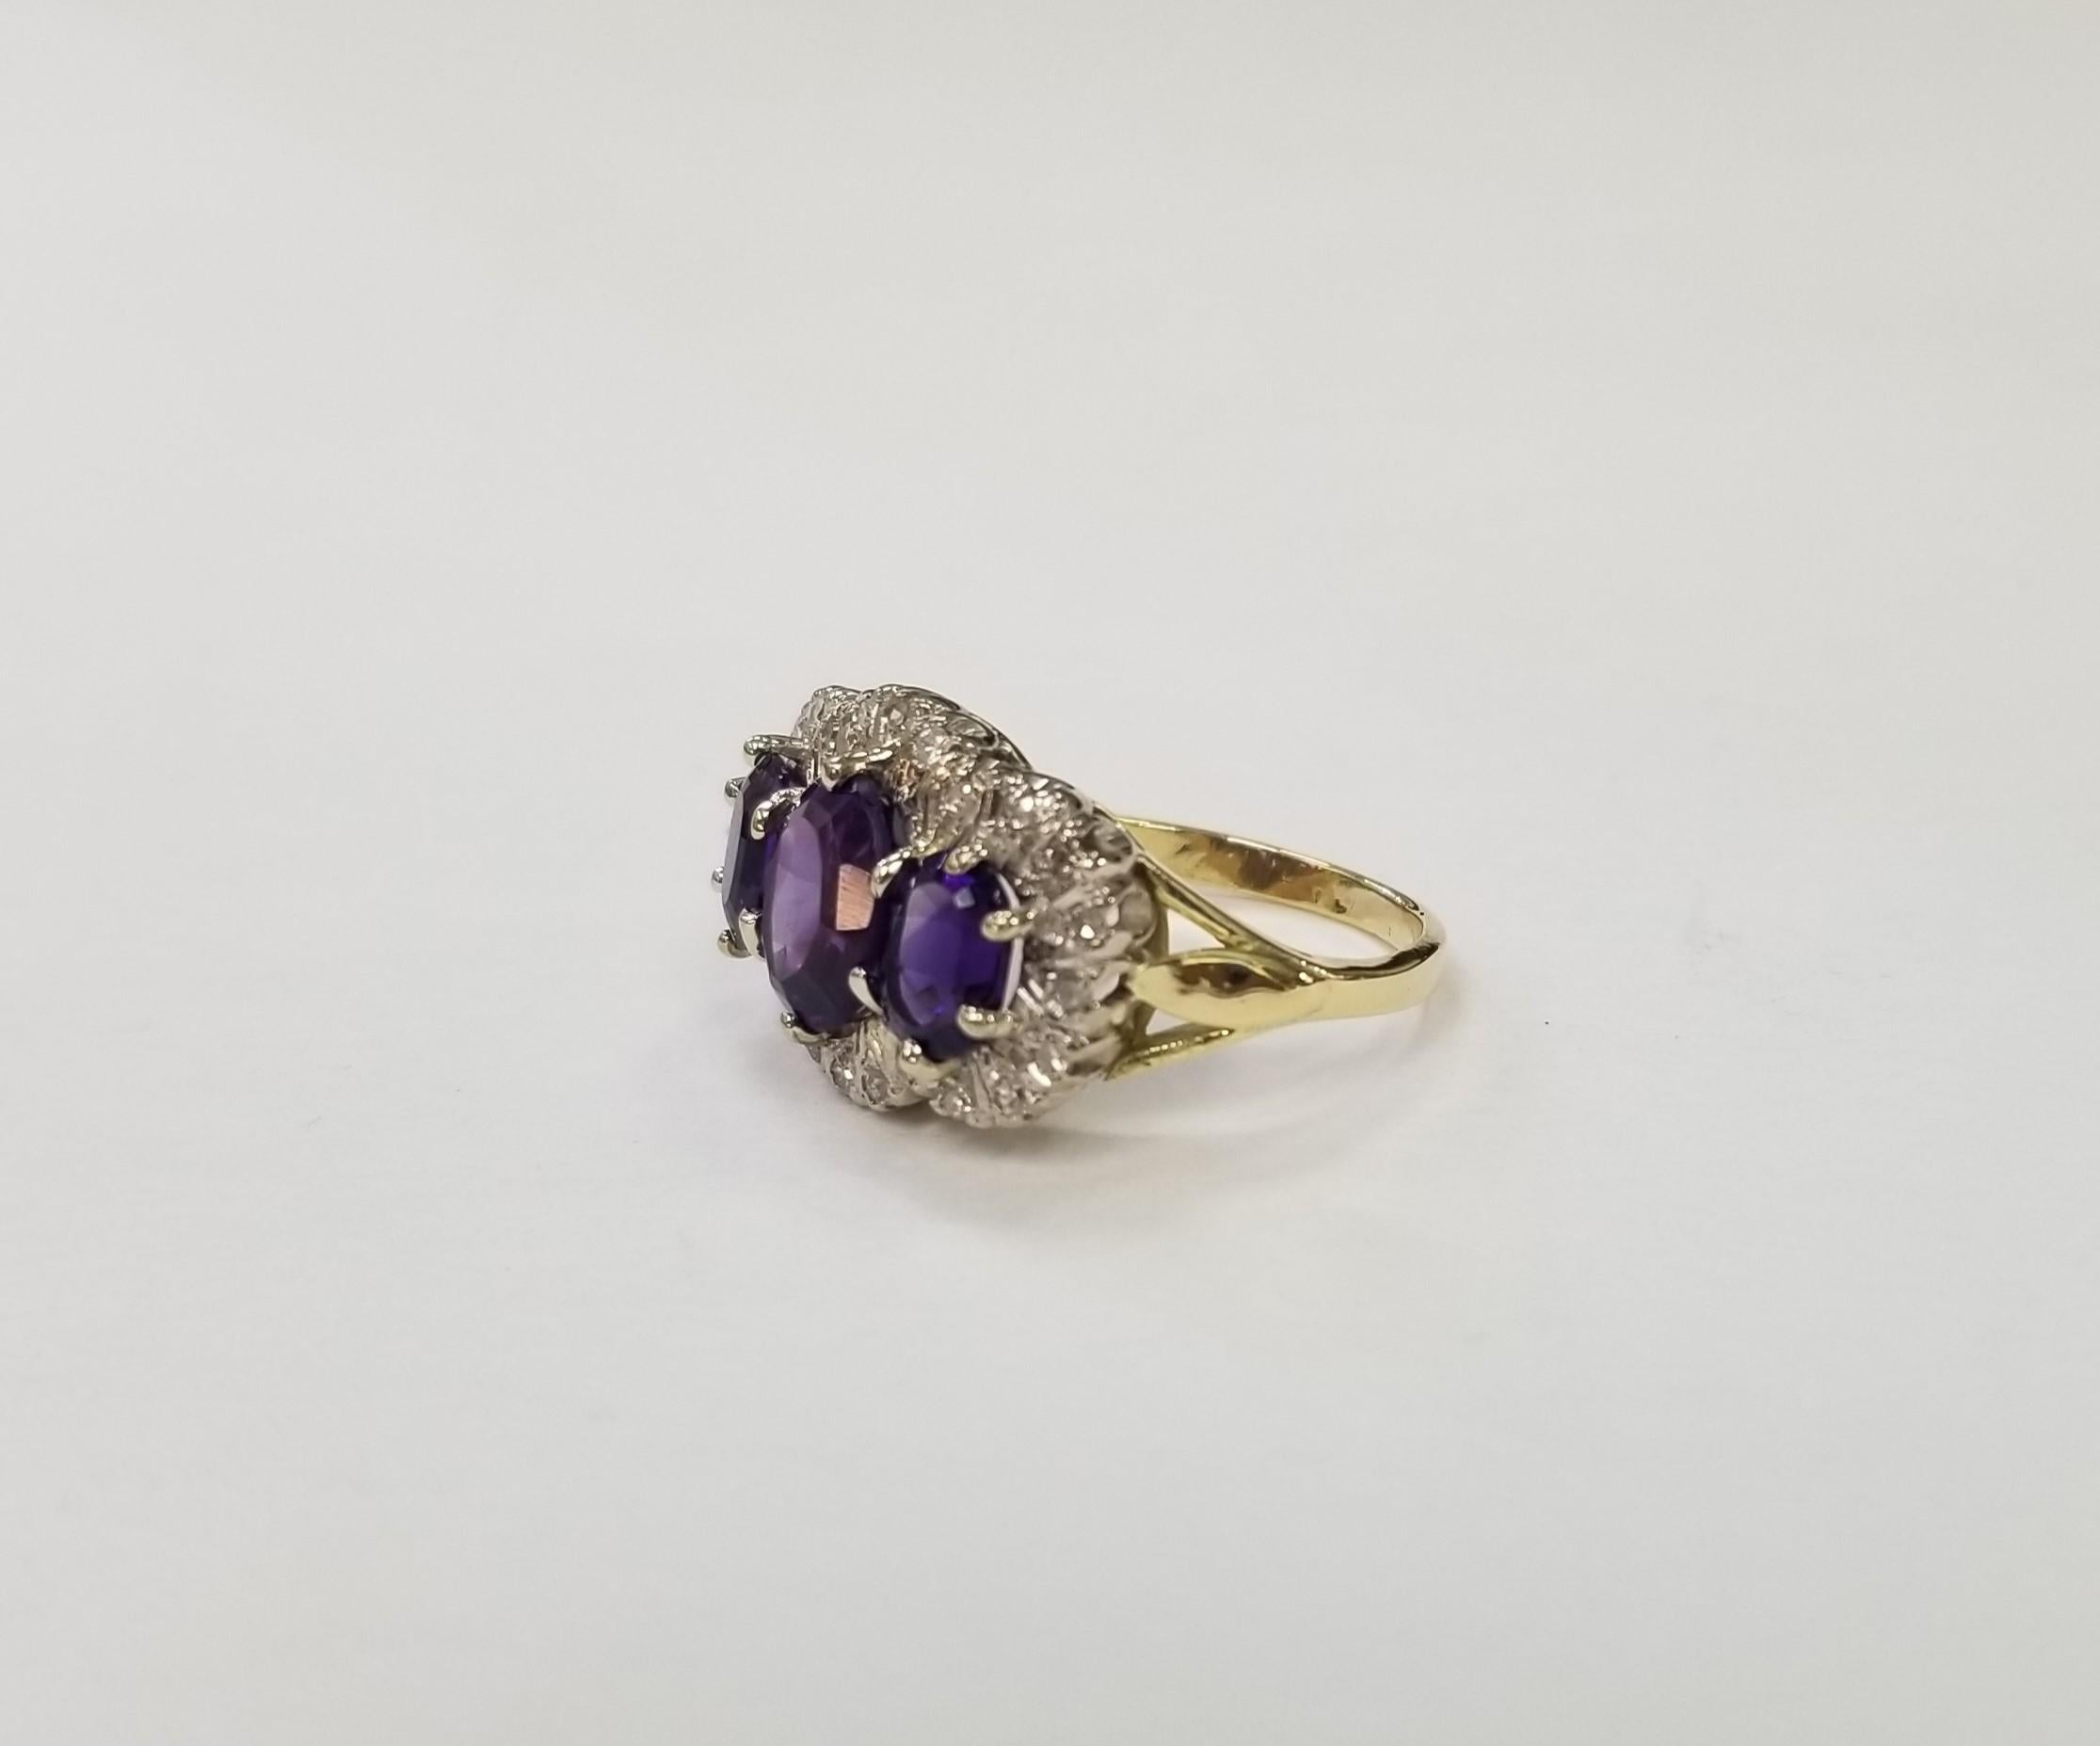 14 Karat Yellow Gold  Amethyst and Diamond Cocktail Ring, 3Amethyst of gem quality weighing 3.50cts. and 24 round single cut diamonds of very fine quality weighing .70pts.  This ring is a size 7.75 but we will size to fit for free.
